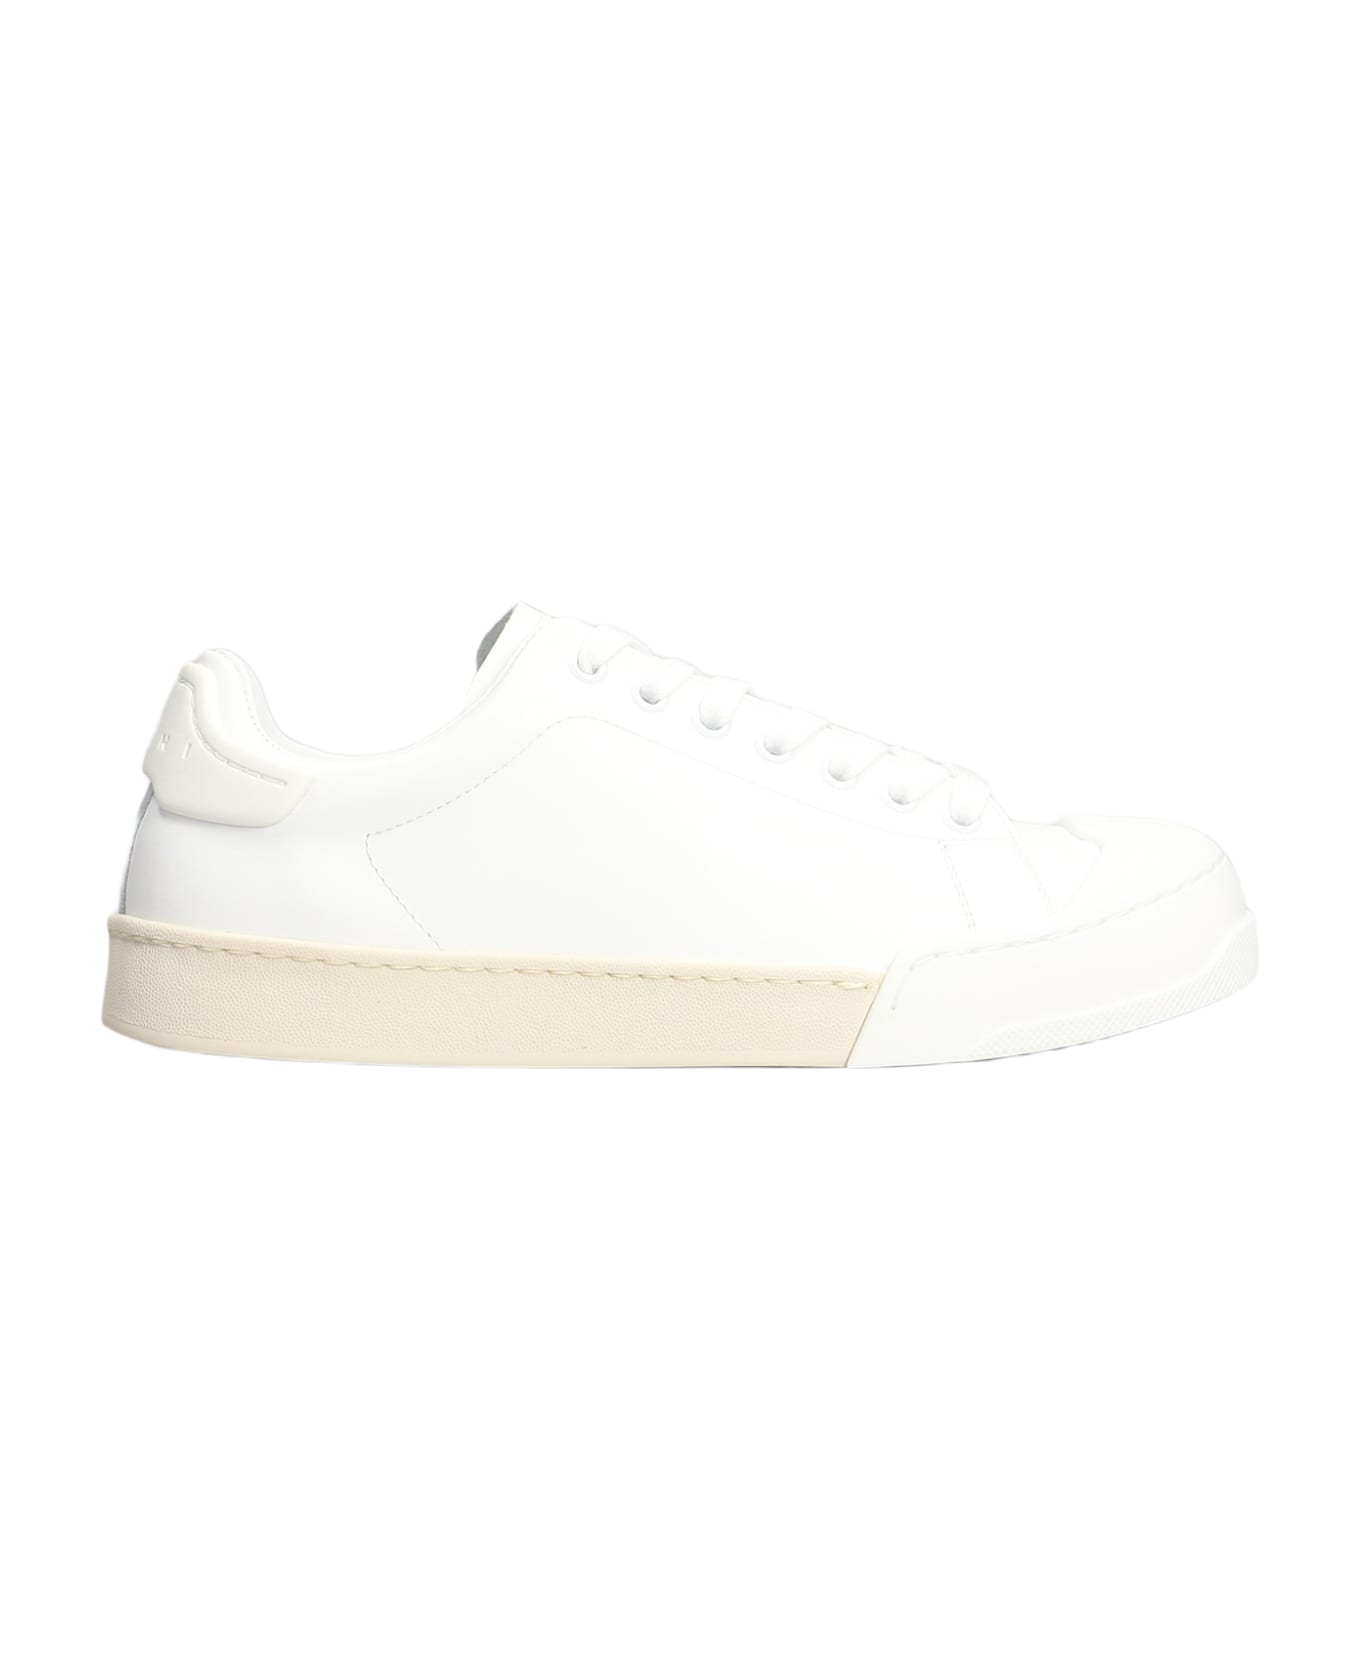 Marni Sneakers In White Leather - WHITE